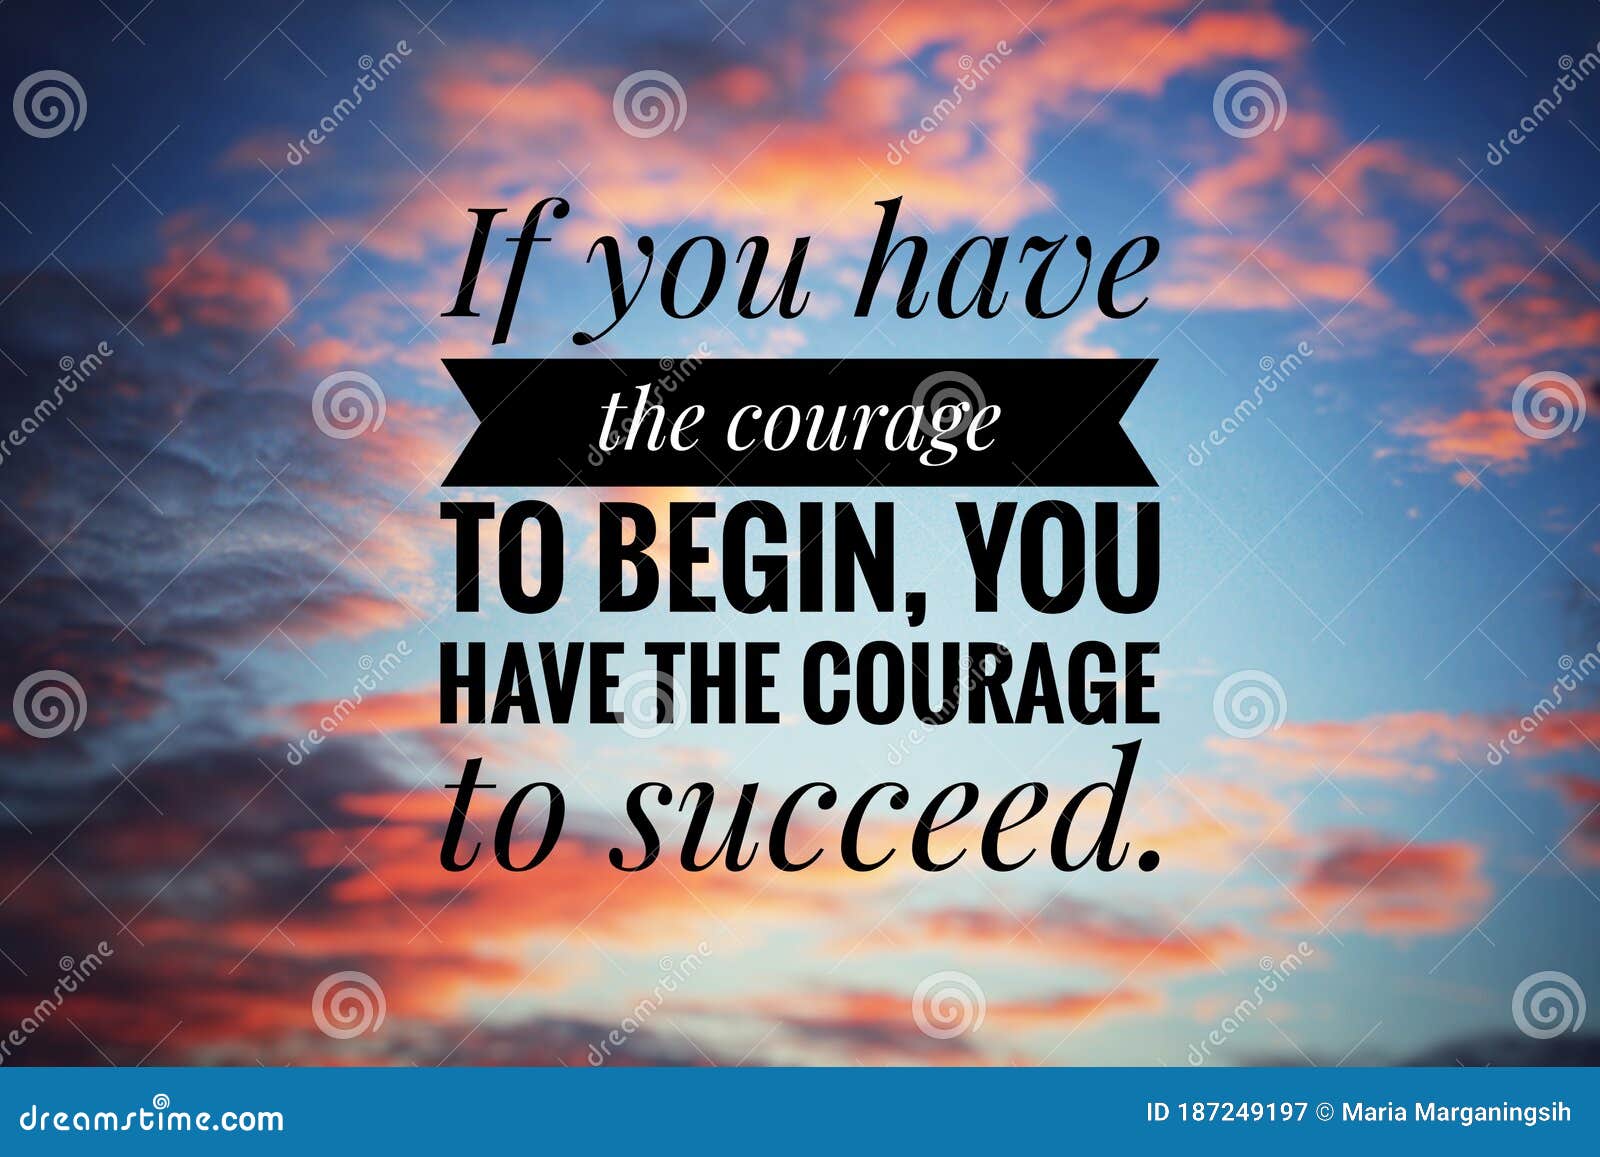 inspirational motivational quote - if you have the courage to begin, you have the courage to succeed. text message in the sky on a